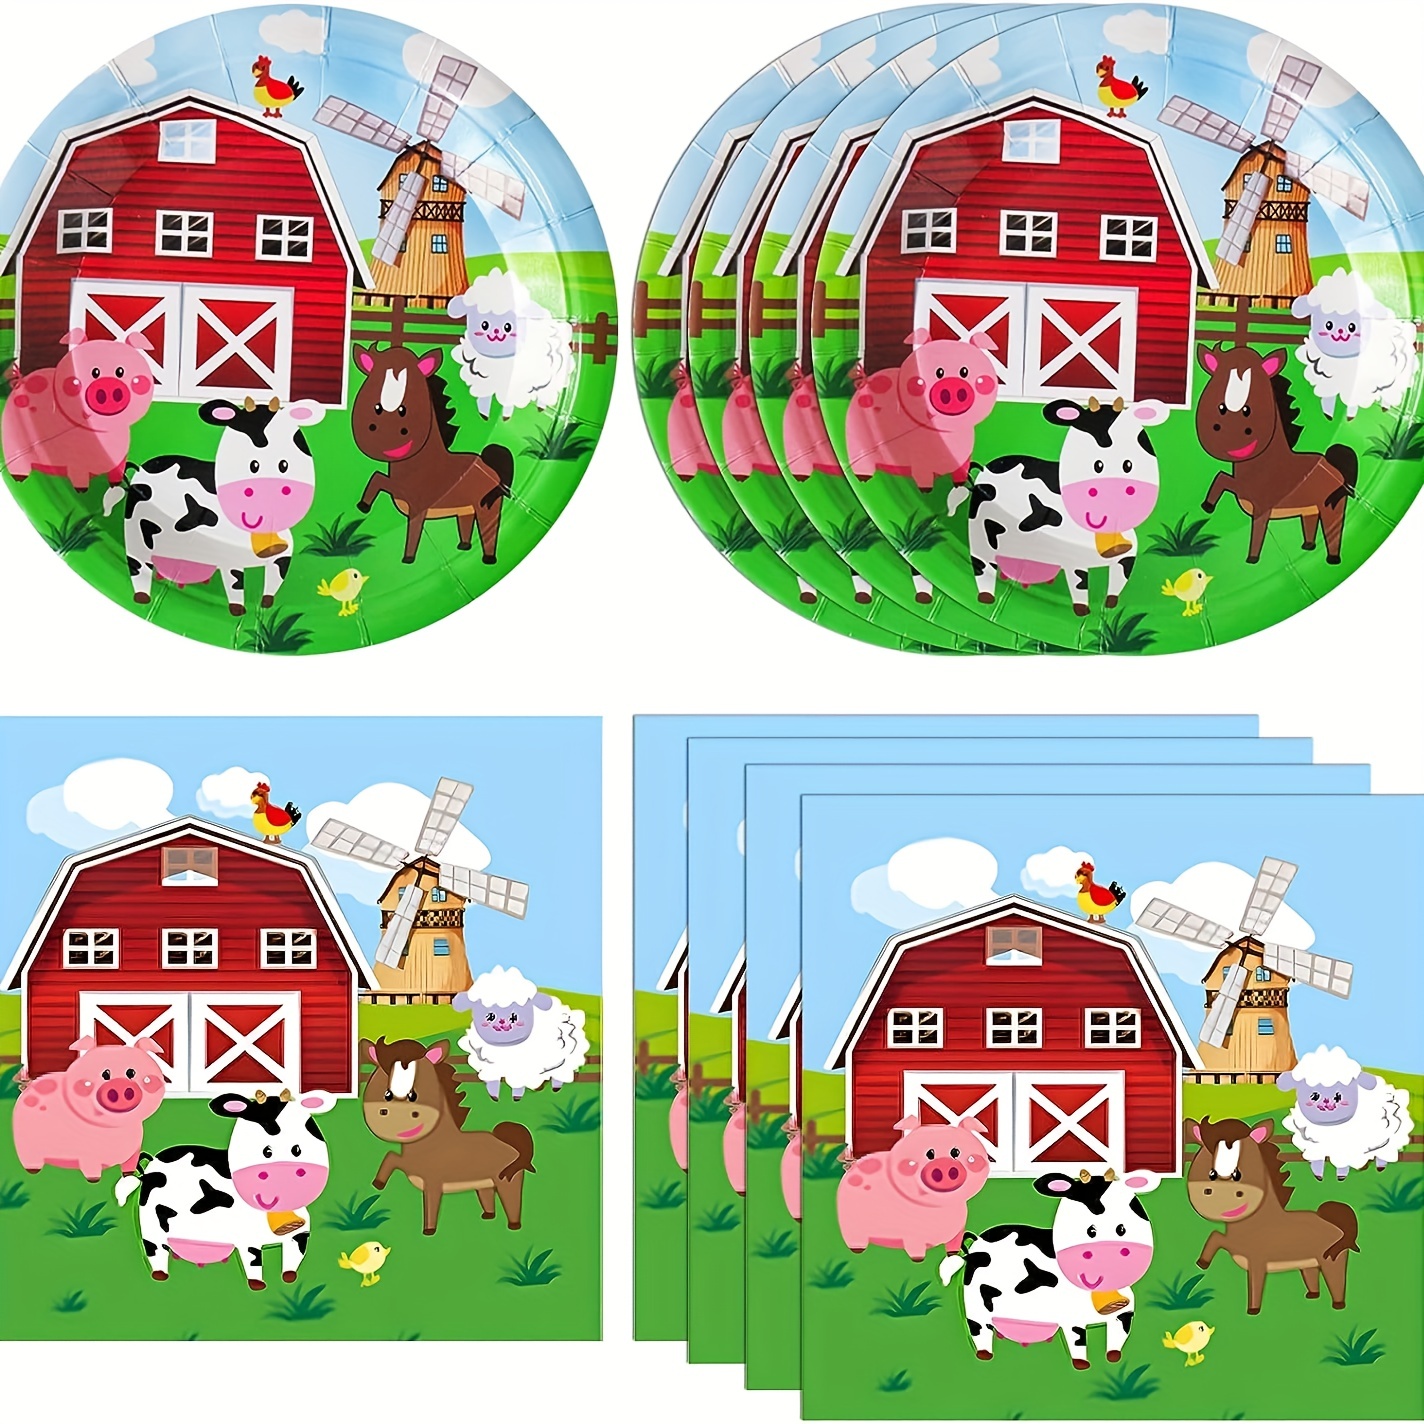 24 Reusable Farm Animal Plastic Straws Chicken Sheep Horse Cow Pig for Barnyard Farm Birthday Party Supplies Gift Favors with 2 Cleaning Brushes